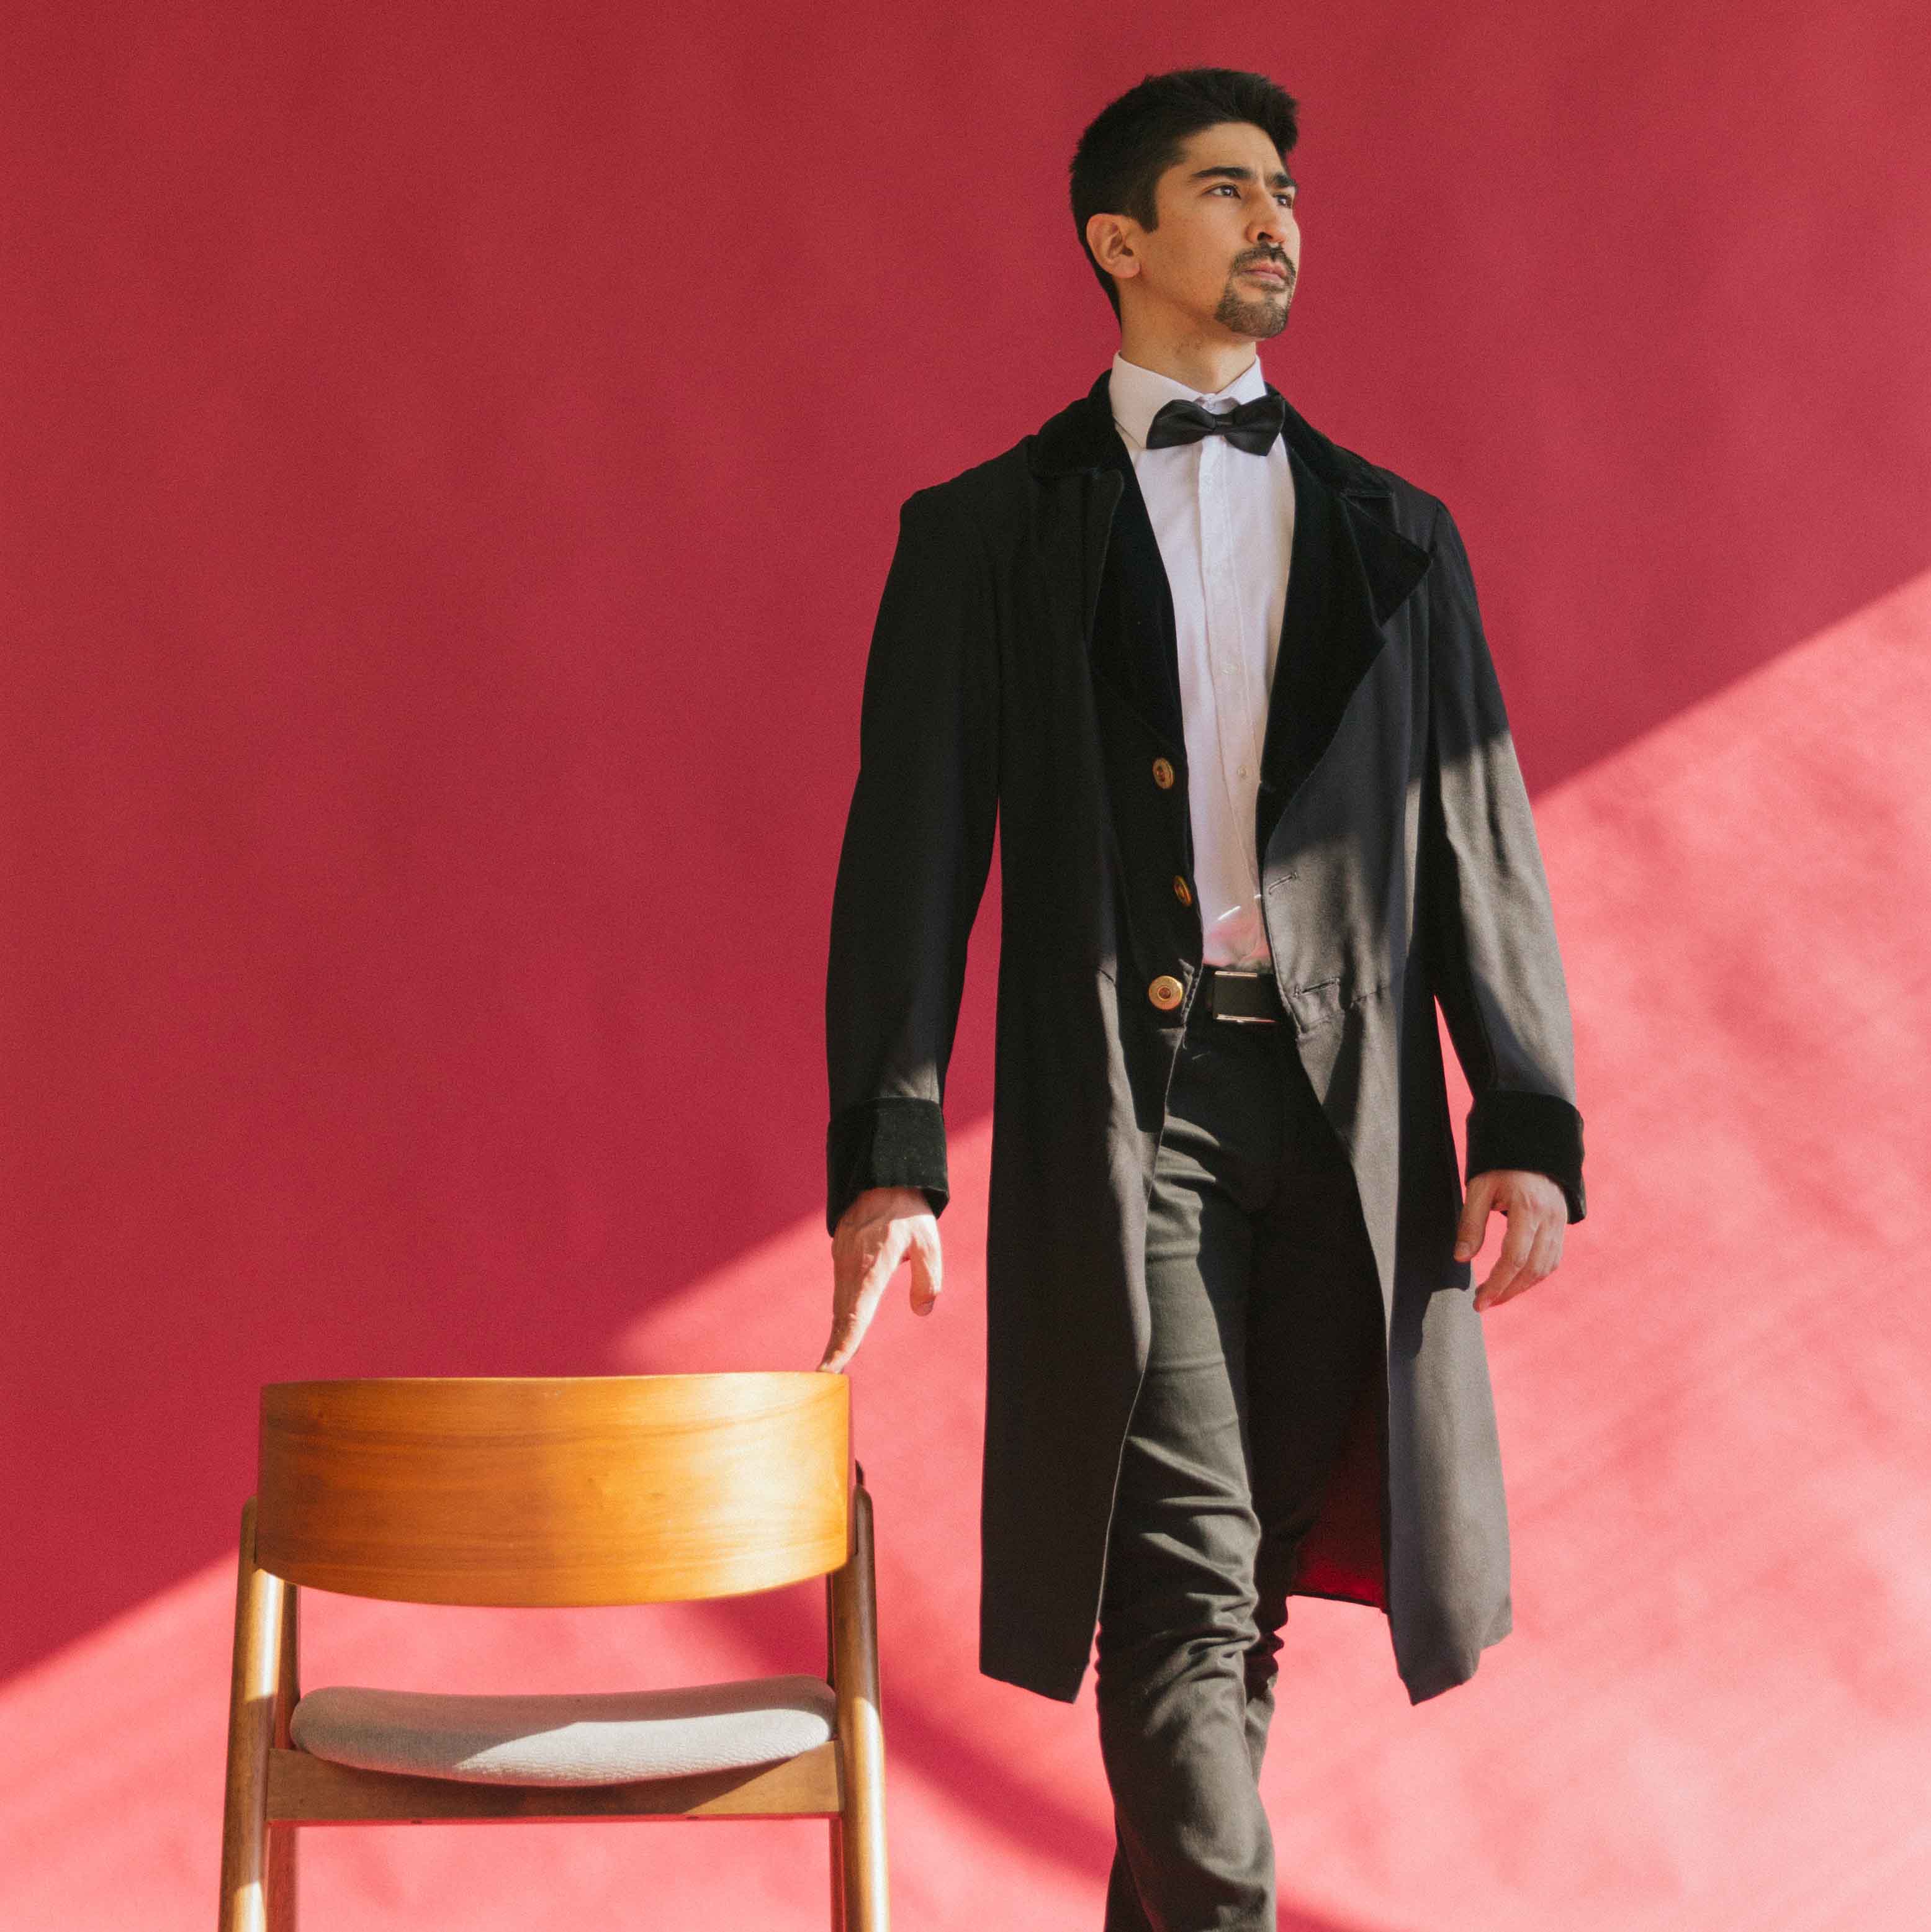 Model BigBong donning a bow-tie and a traditional long coat, striking a pose beside a chair with a vibrant red background – a stylish and sophisticated image.